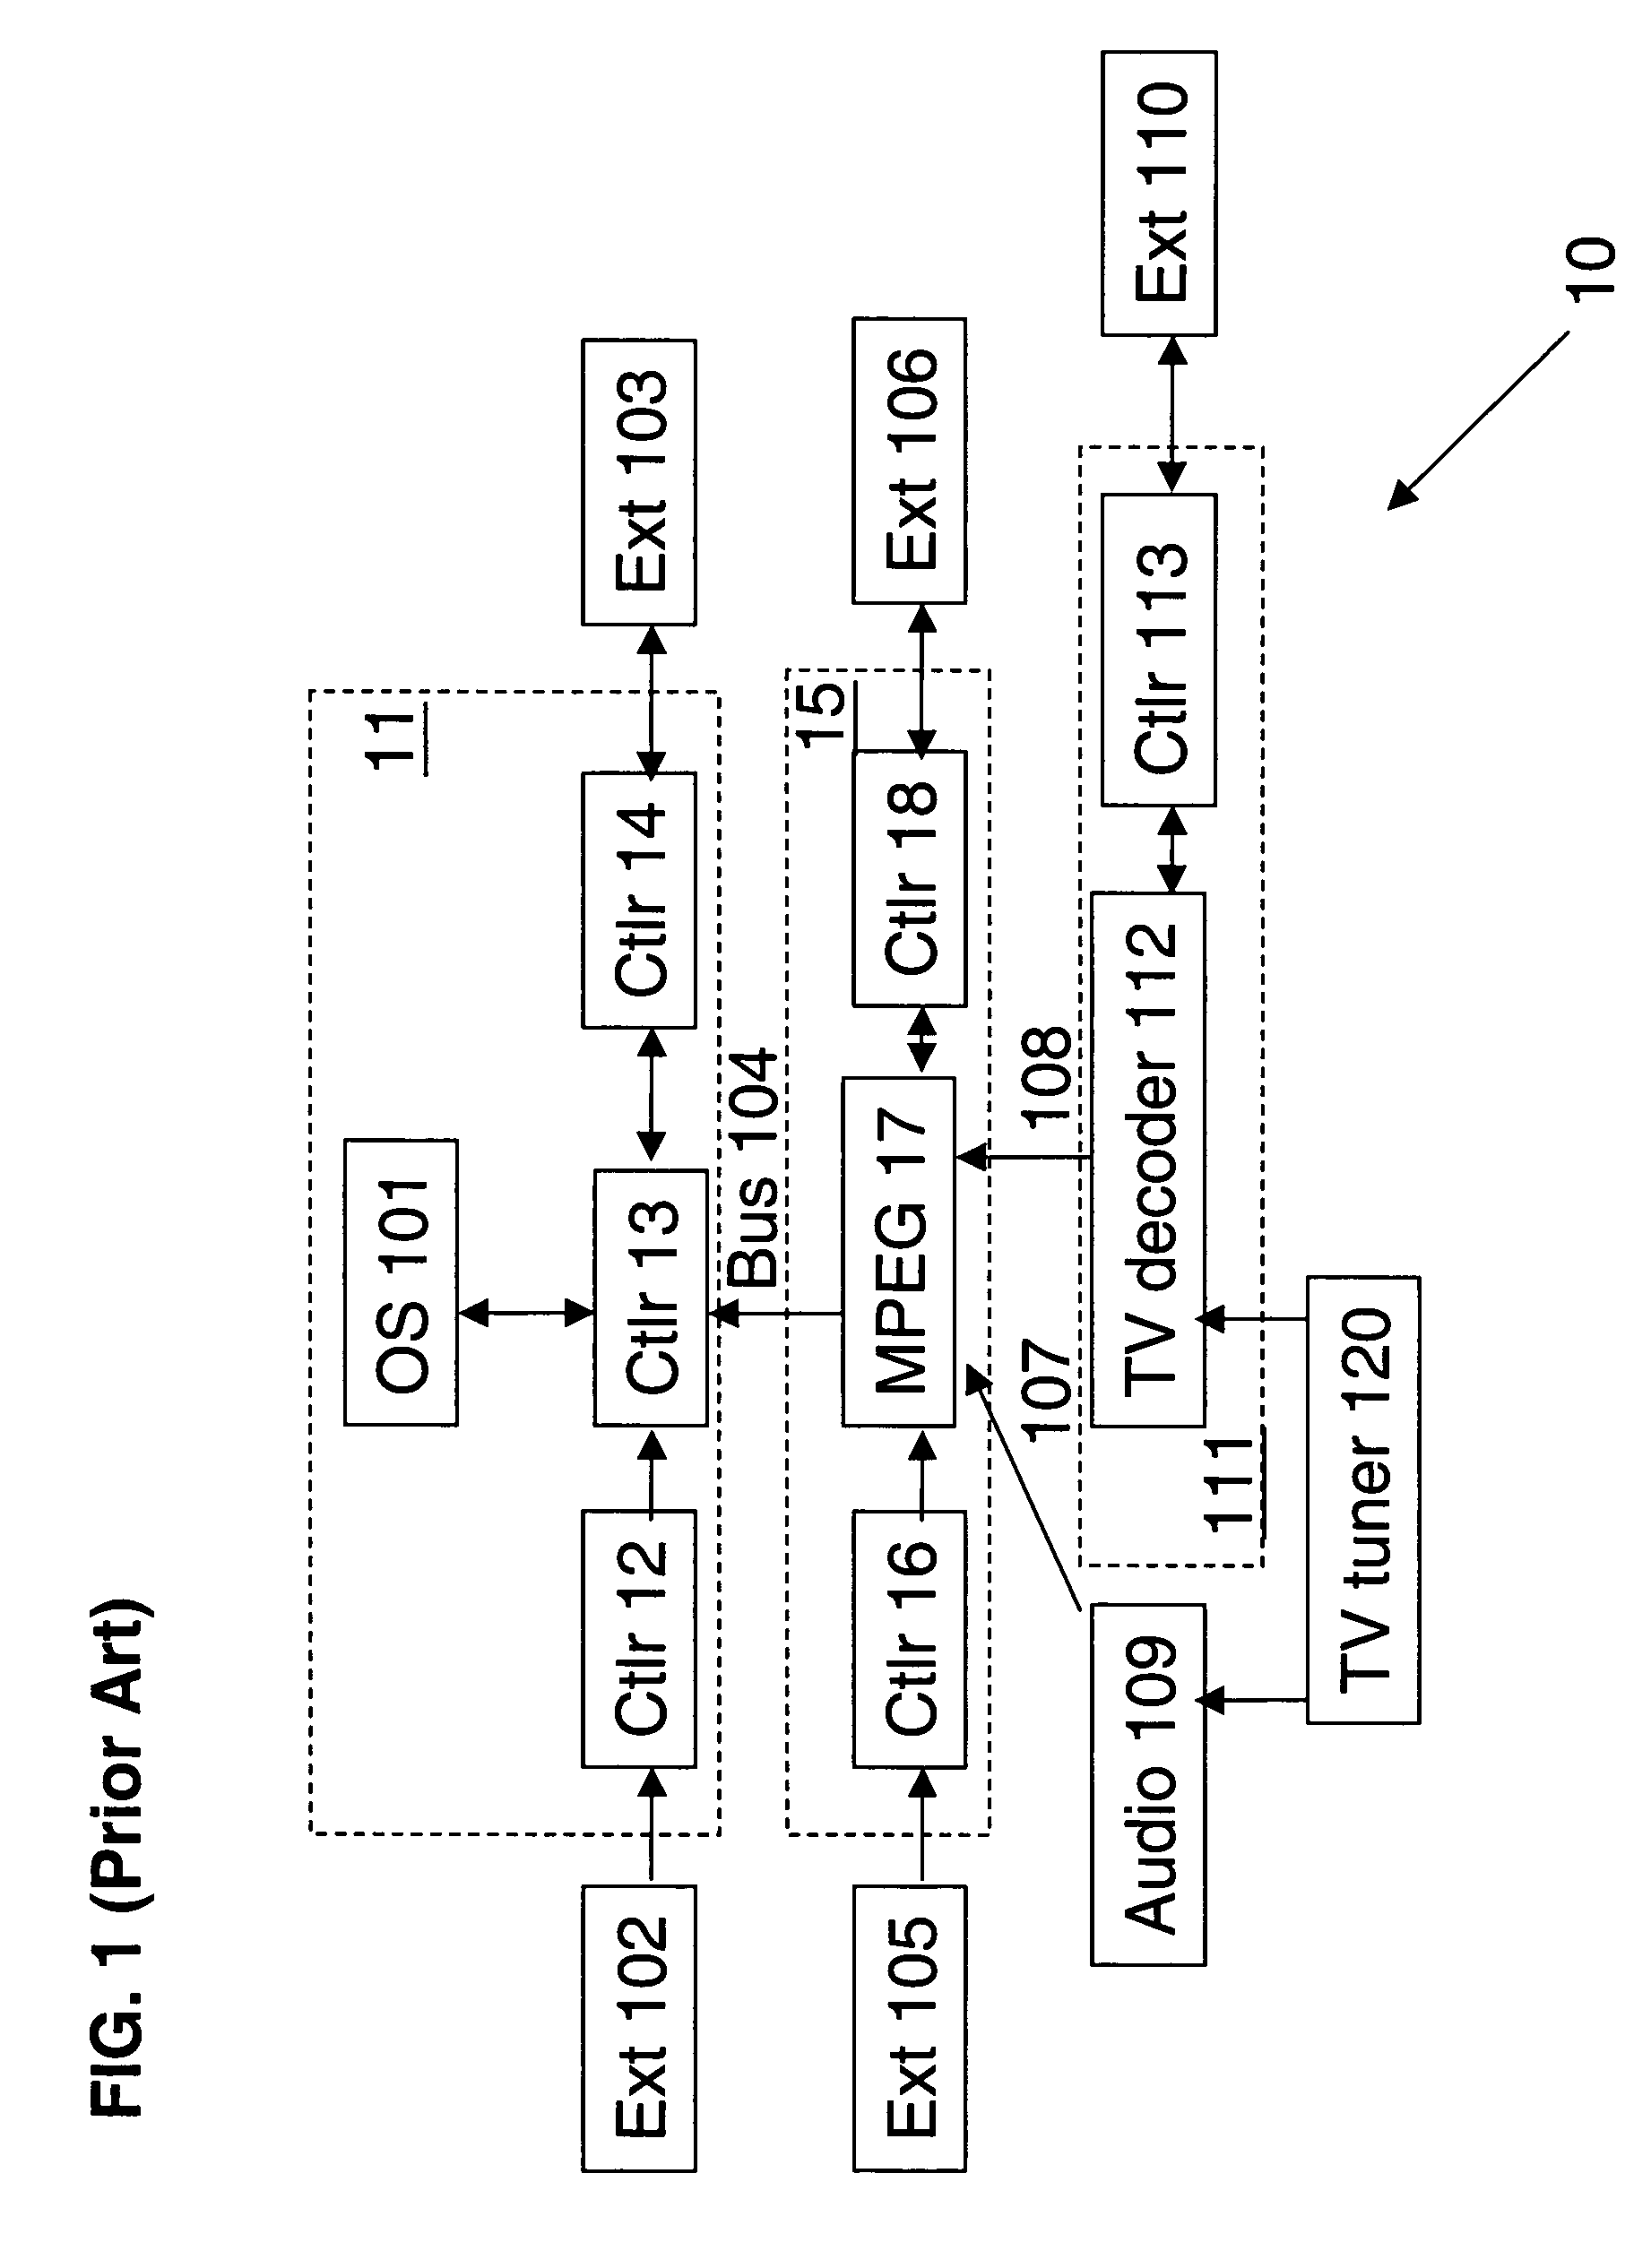 Shared memory architecture and method in an optical storage and recording system